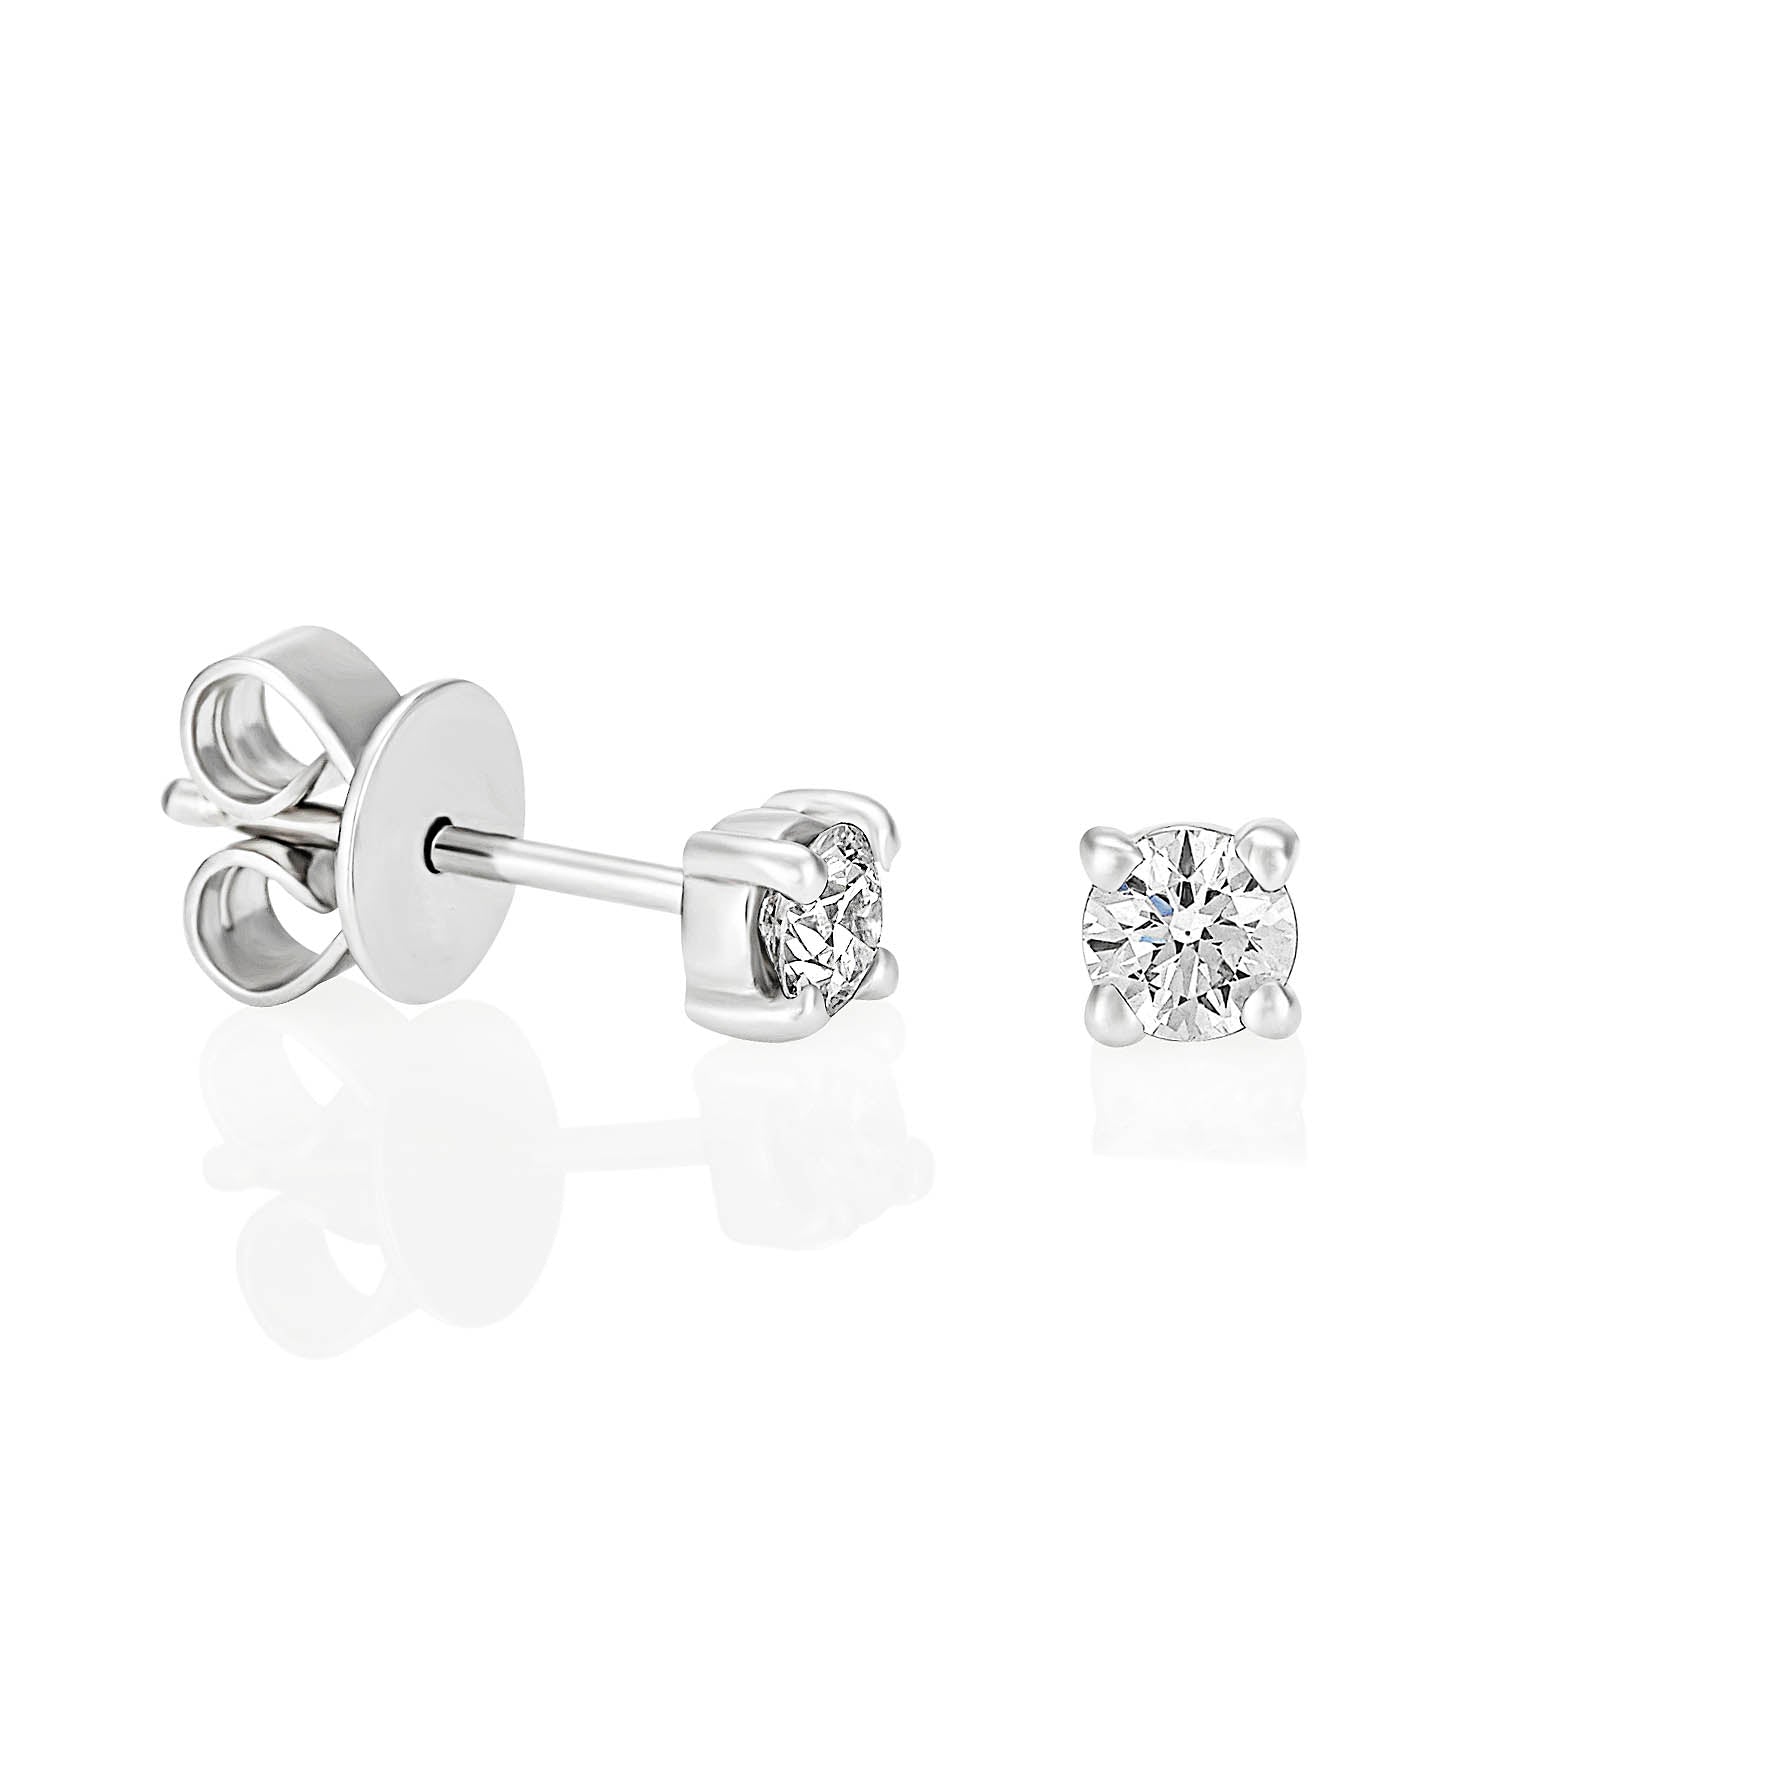 Palomino Solitaire Diamond Stud Earrings in 18 ct White Gold 0.30 ct